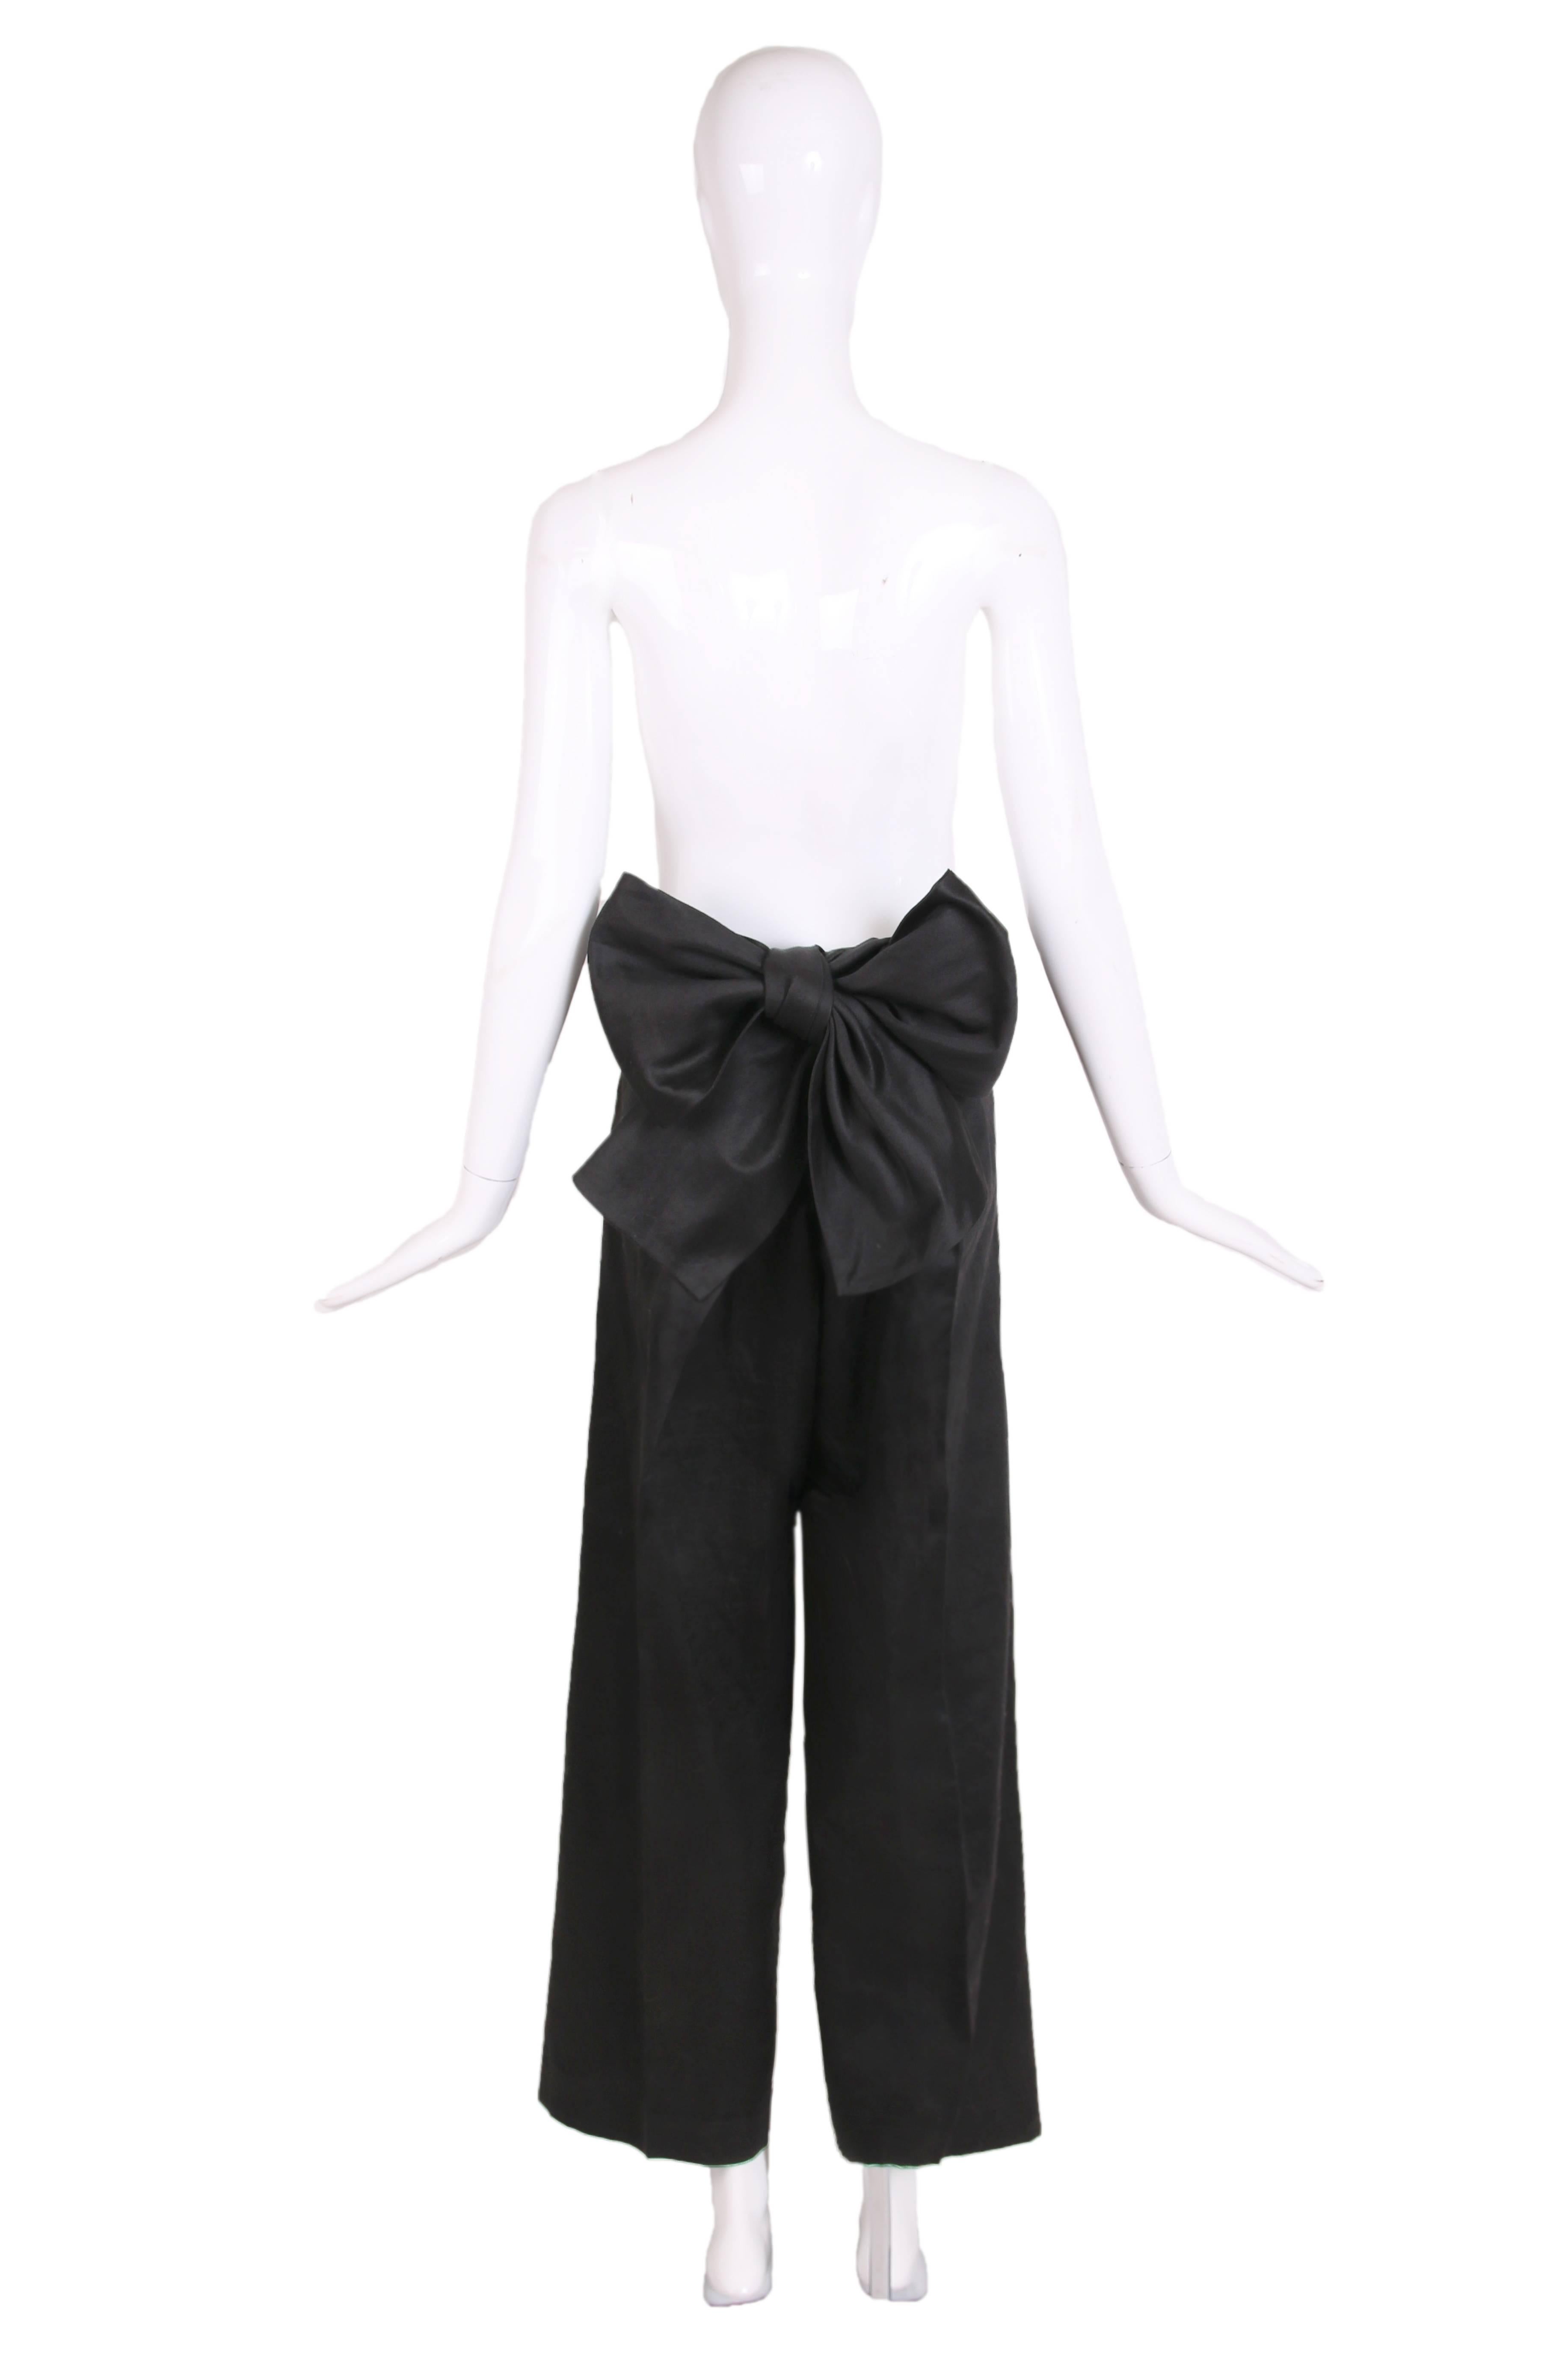 Yohji Yamamoto, Y's label black linen and cotton wide leg trouser with large sash bow at the back. These trousers have  side pockets and a snap and zipper fly closure. Size 2. In excellent condition.